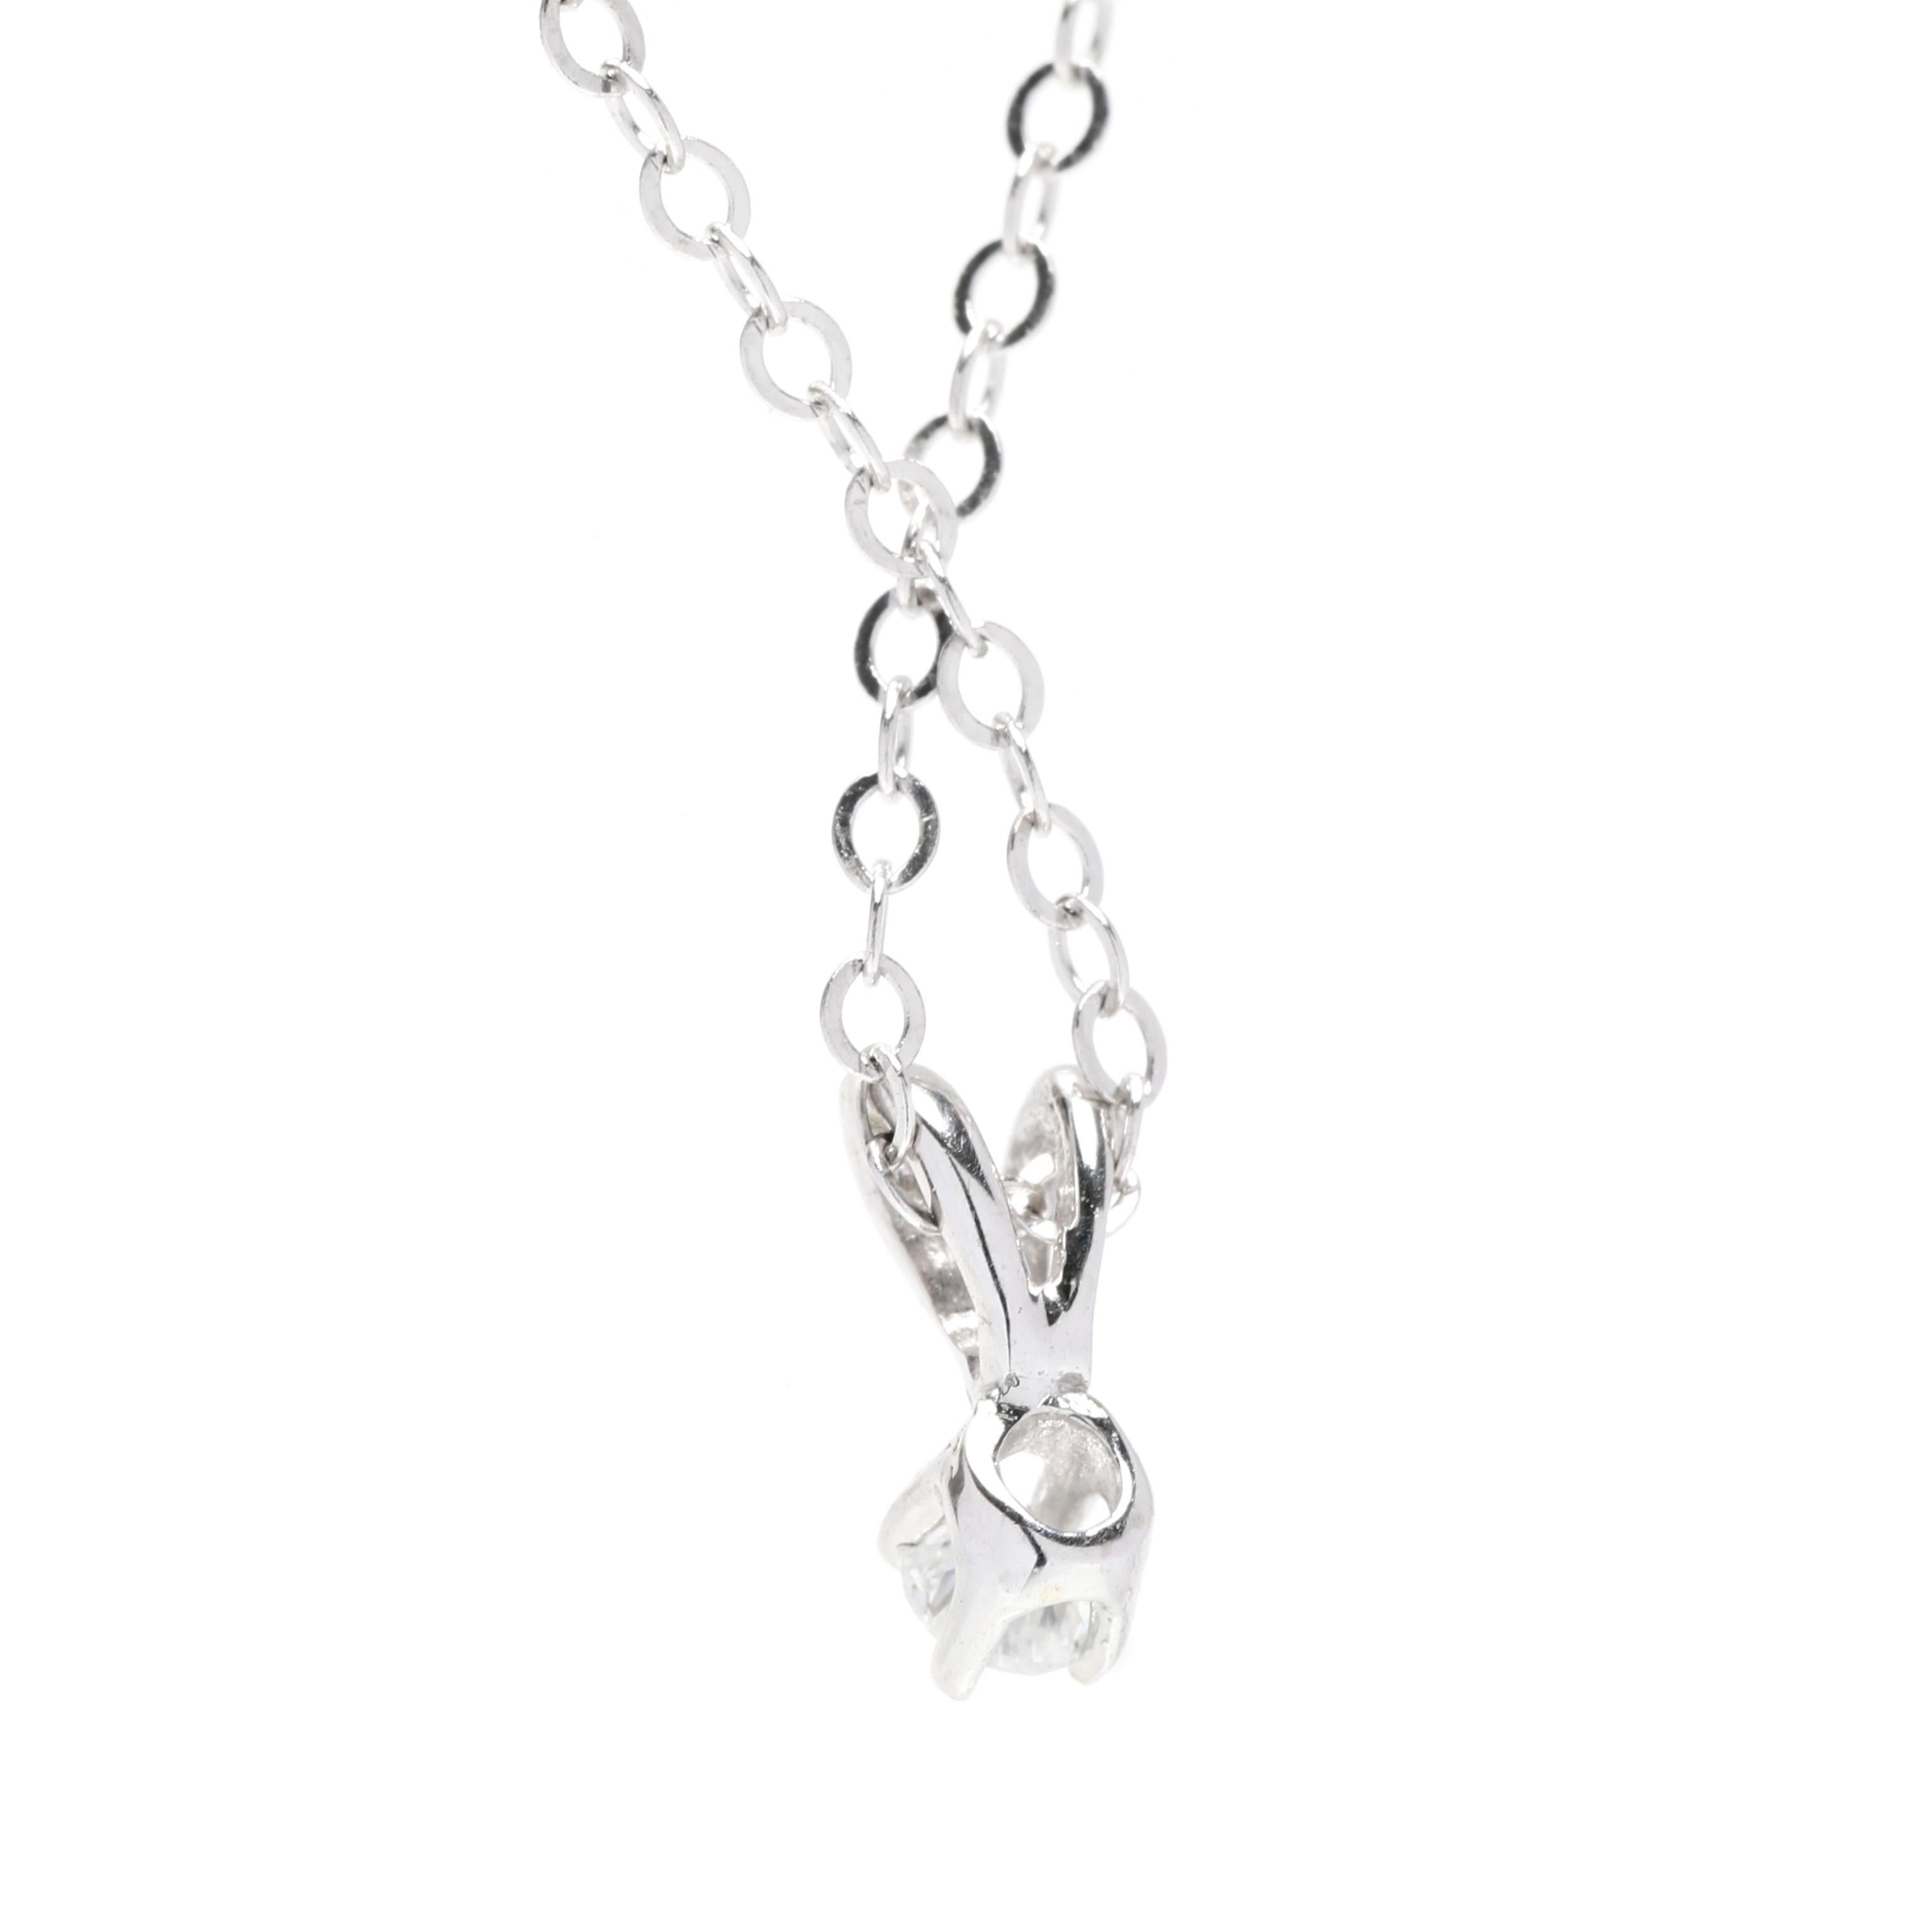 This 0.05ctw tiny diamond solitaire pendant necklace is the perfect way to add a bit of sparkle to your everyday look. Crafted in 14K white gold, this delicate necklace features a petite round diamond that is suspended from an 18-inch chain. It's